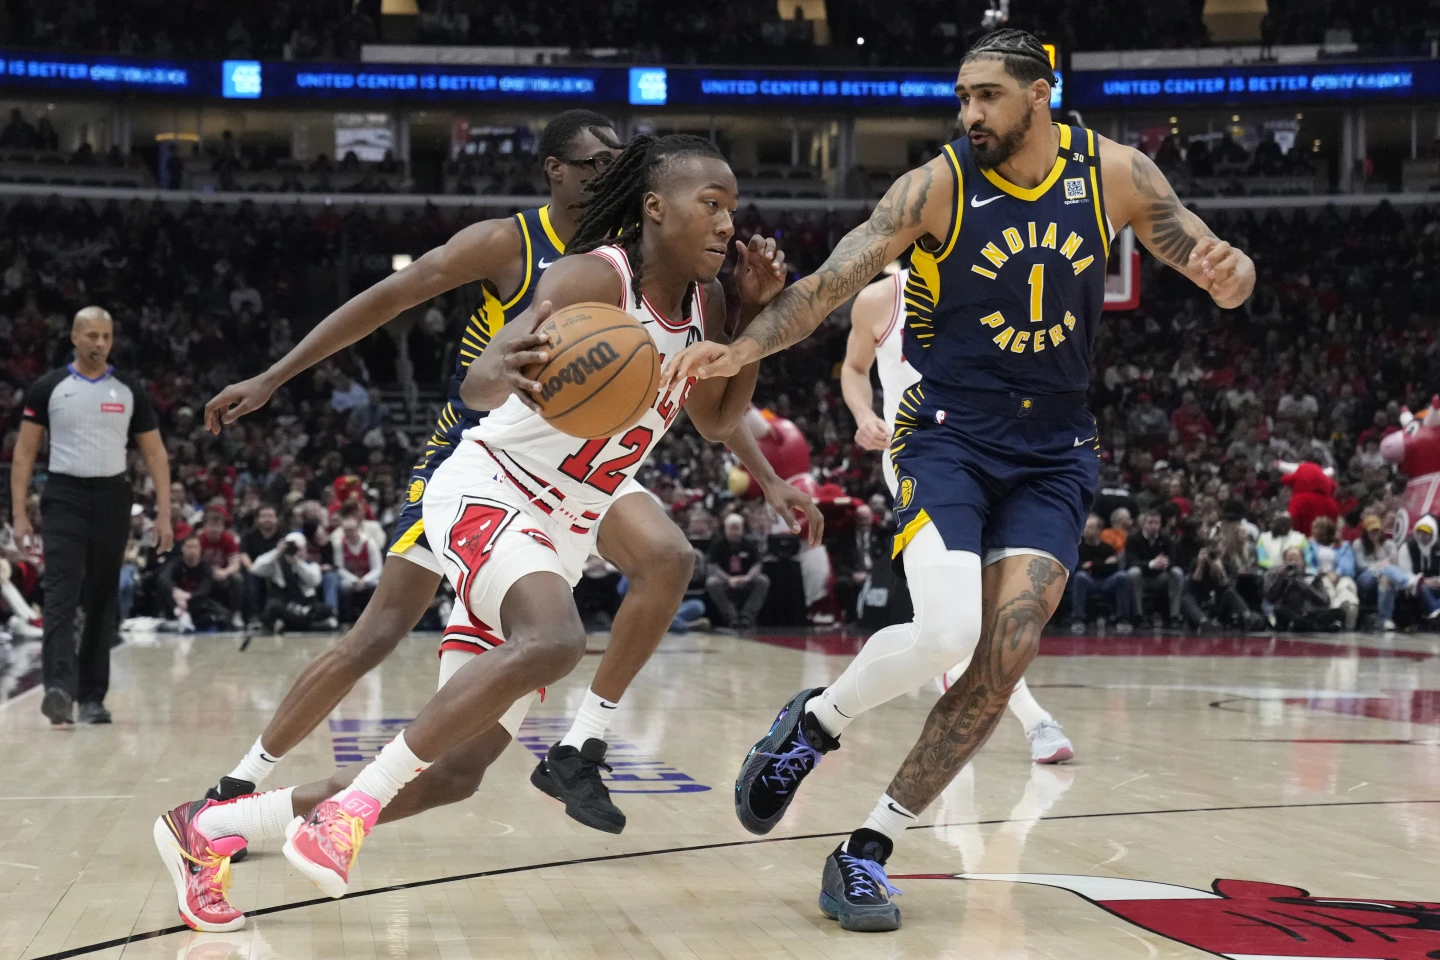 DeRozan and Vucevic guide Chicago Bulls to a 125-99 victory over Indiana Pacers, halting a 3-game losing streak